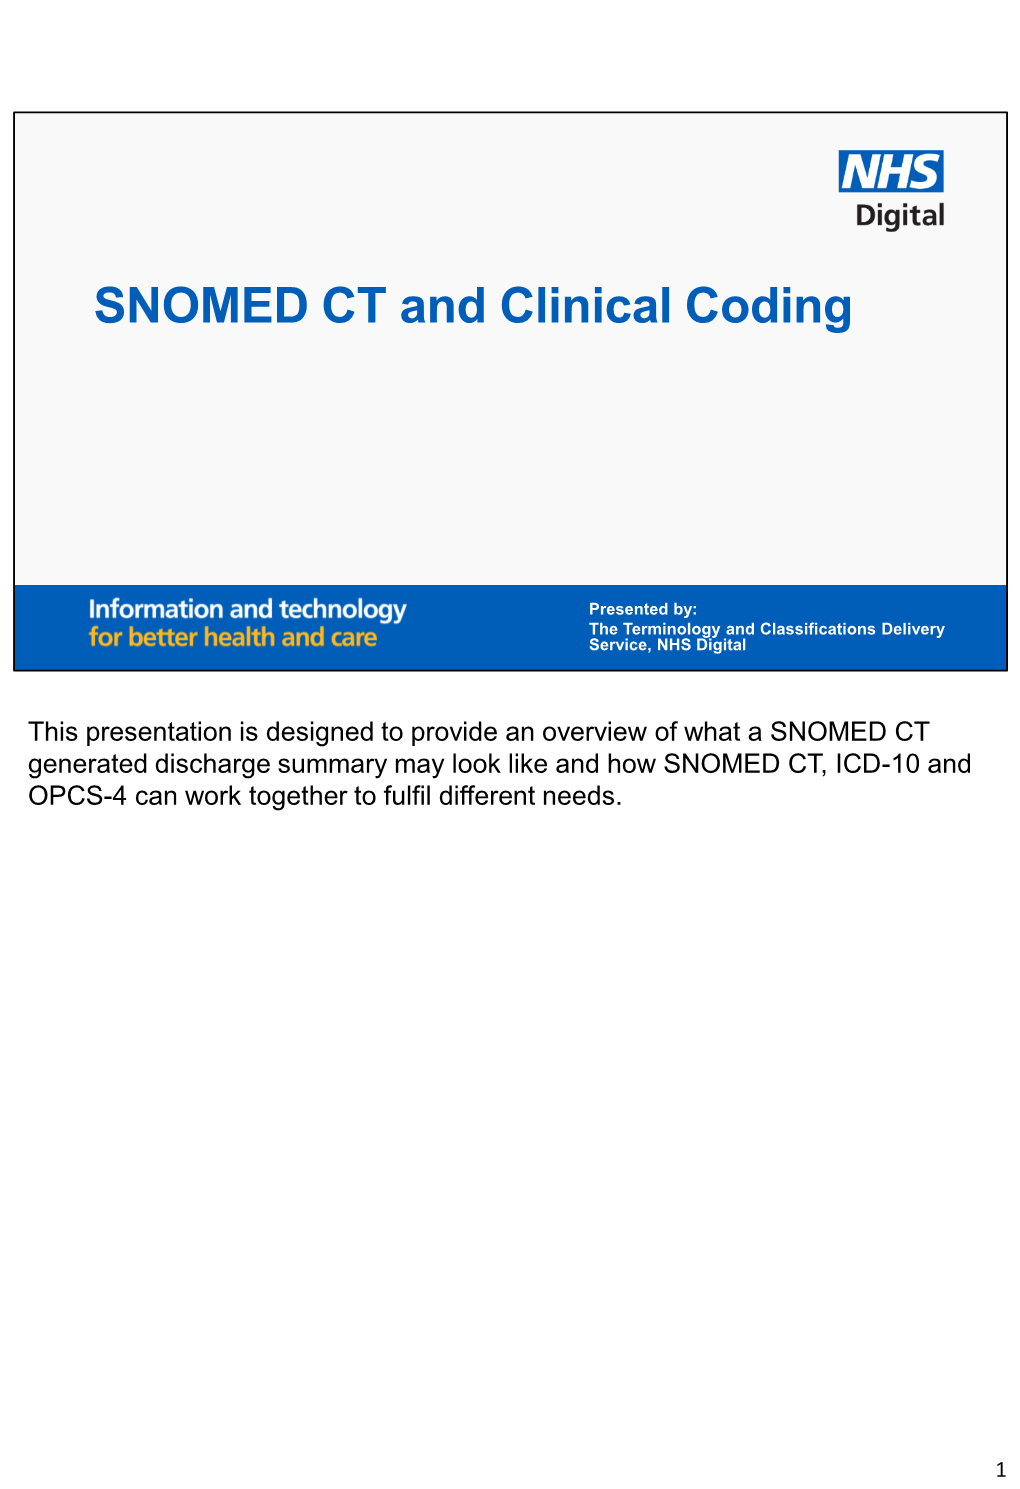 SNOMED CT and Clinical Coding